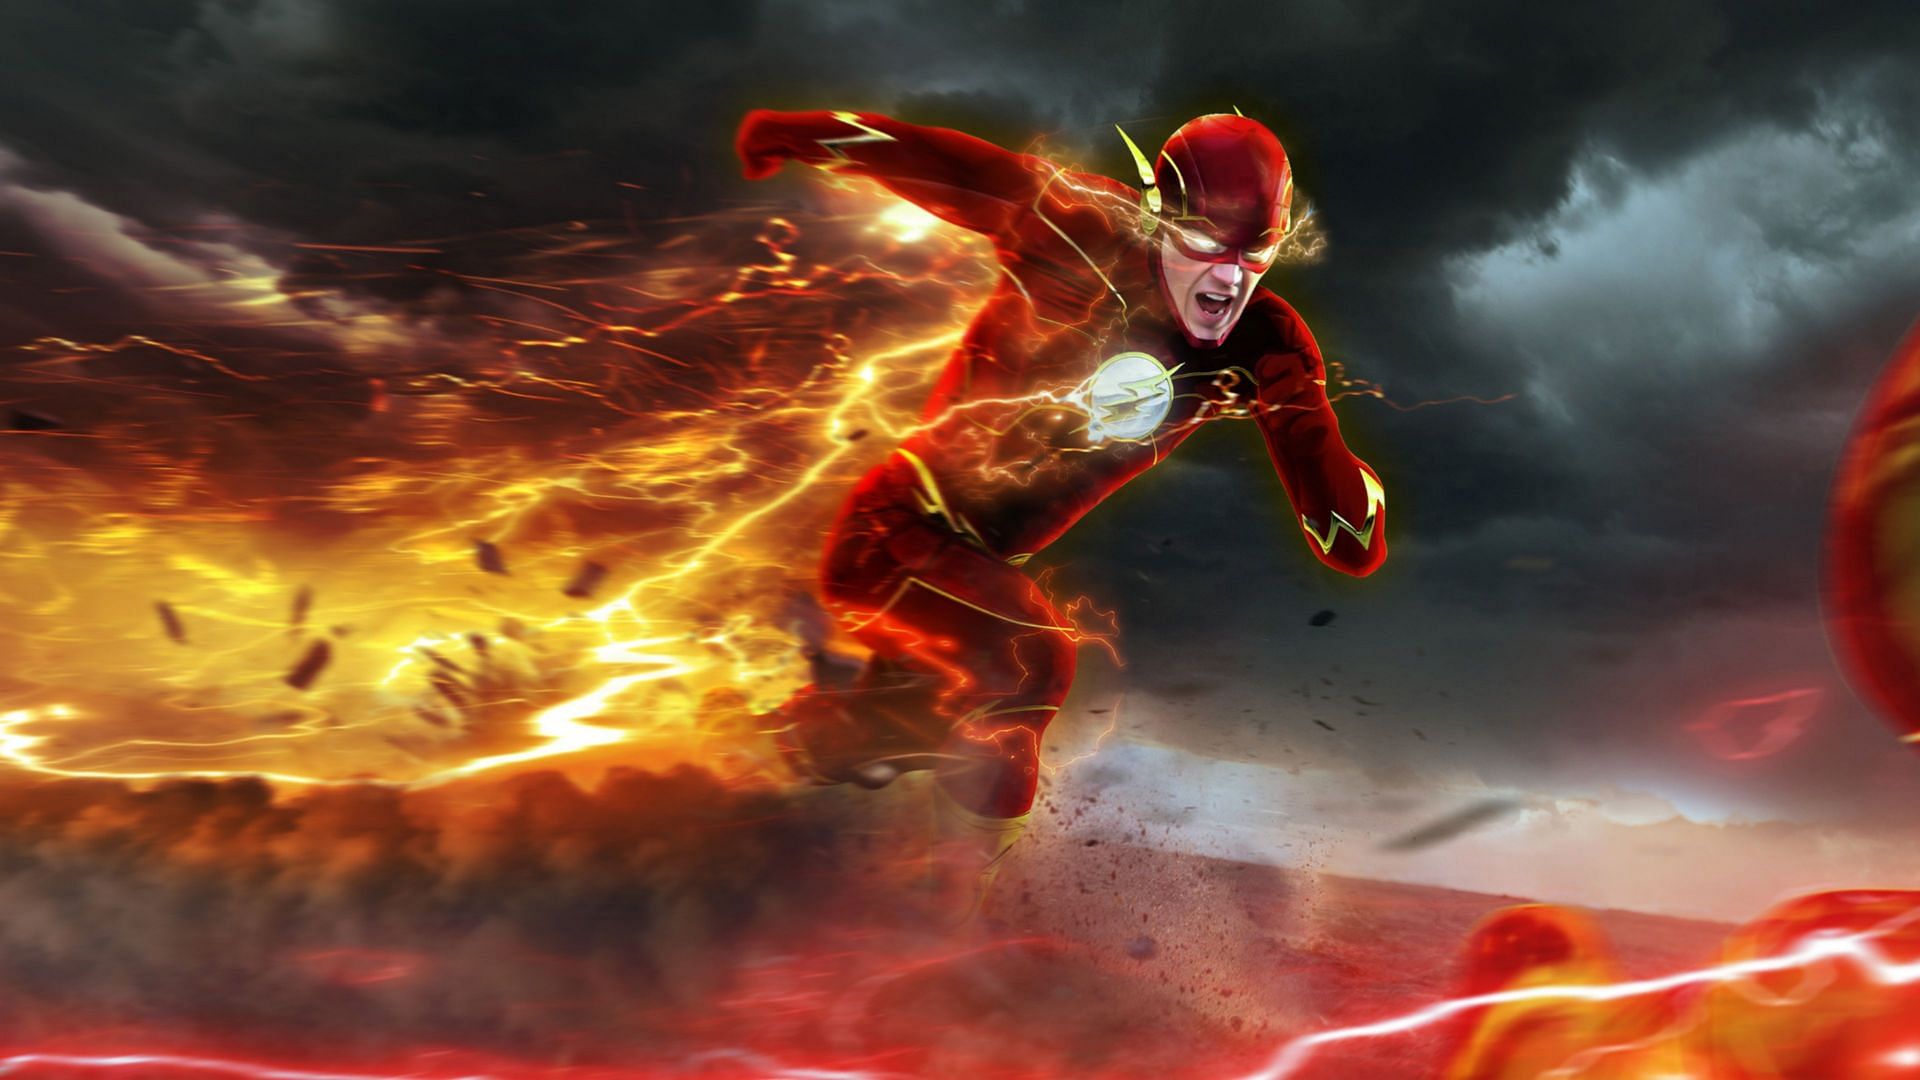 Flash is truly a force to be reckoned with - a superhero that can shift the balance of power in any situation. (Image via DC Universe)